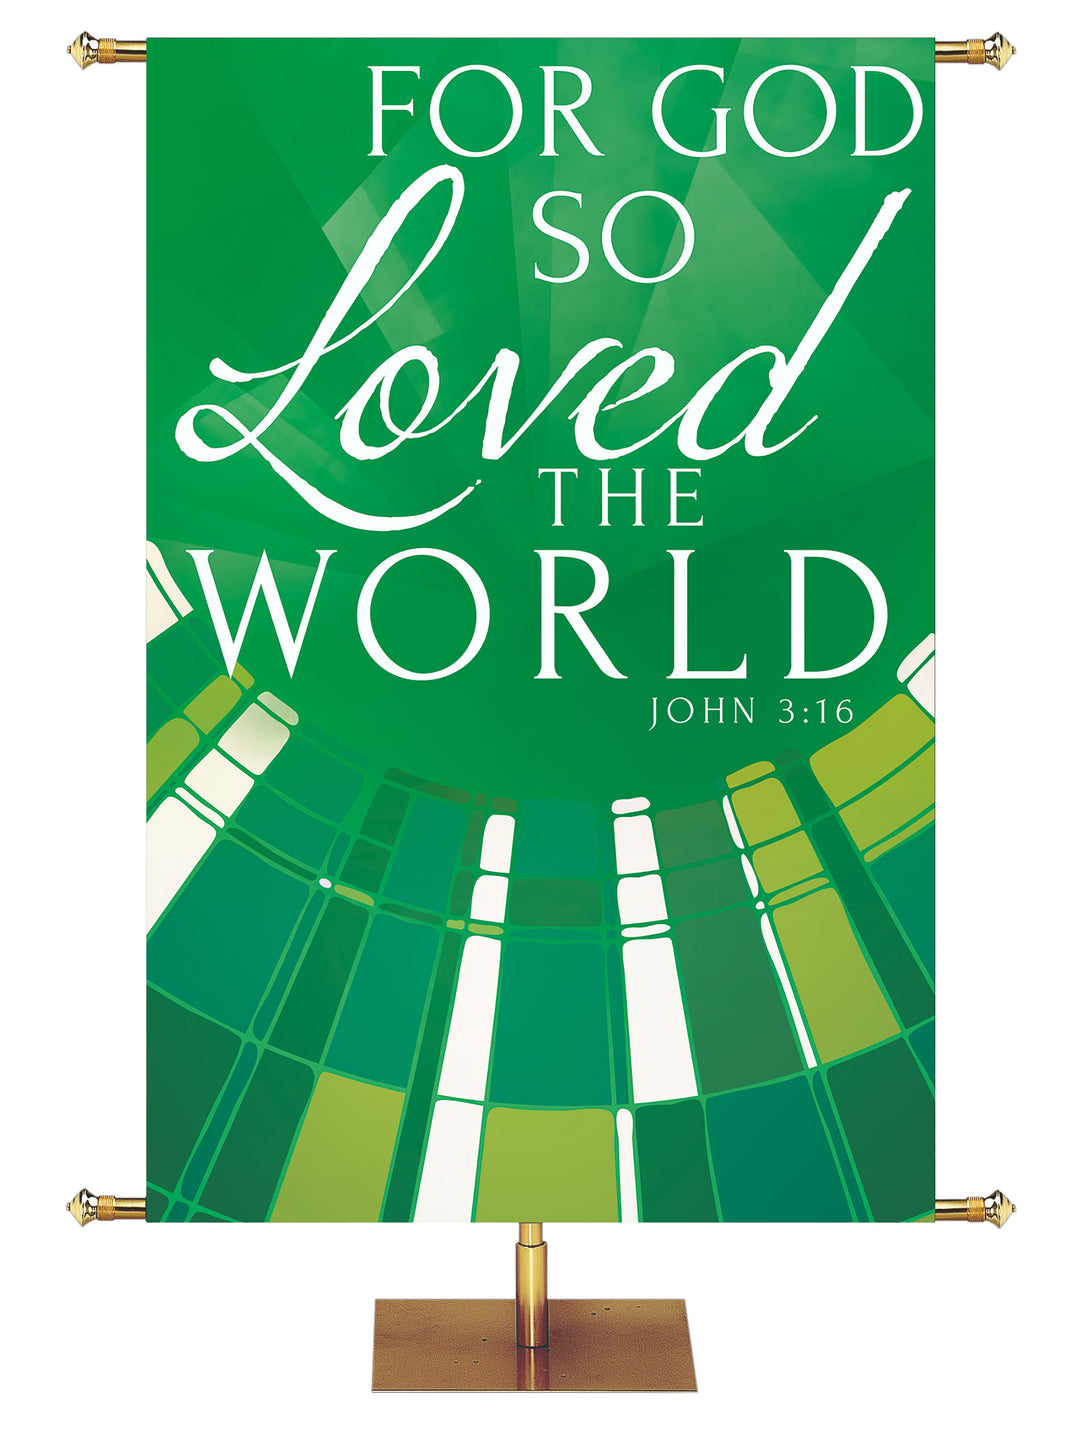 Church Banner Streaming Light For God So Loved The World. John 3:16. In Blue, Green, Purple and Red.